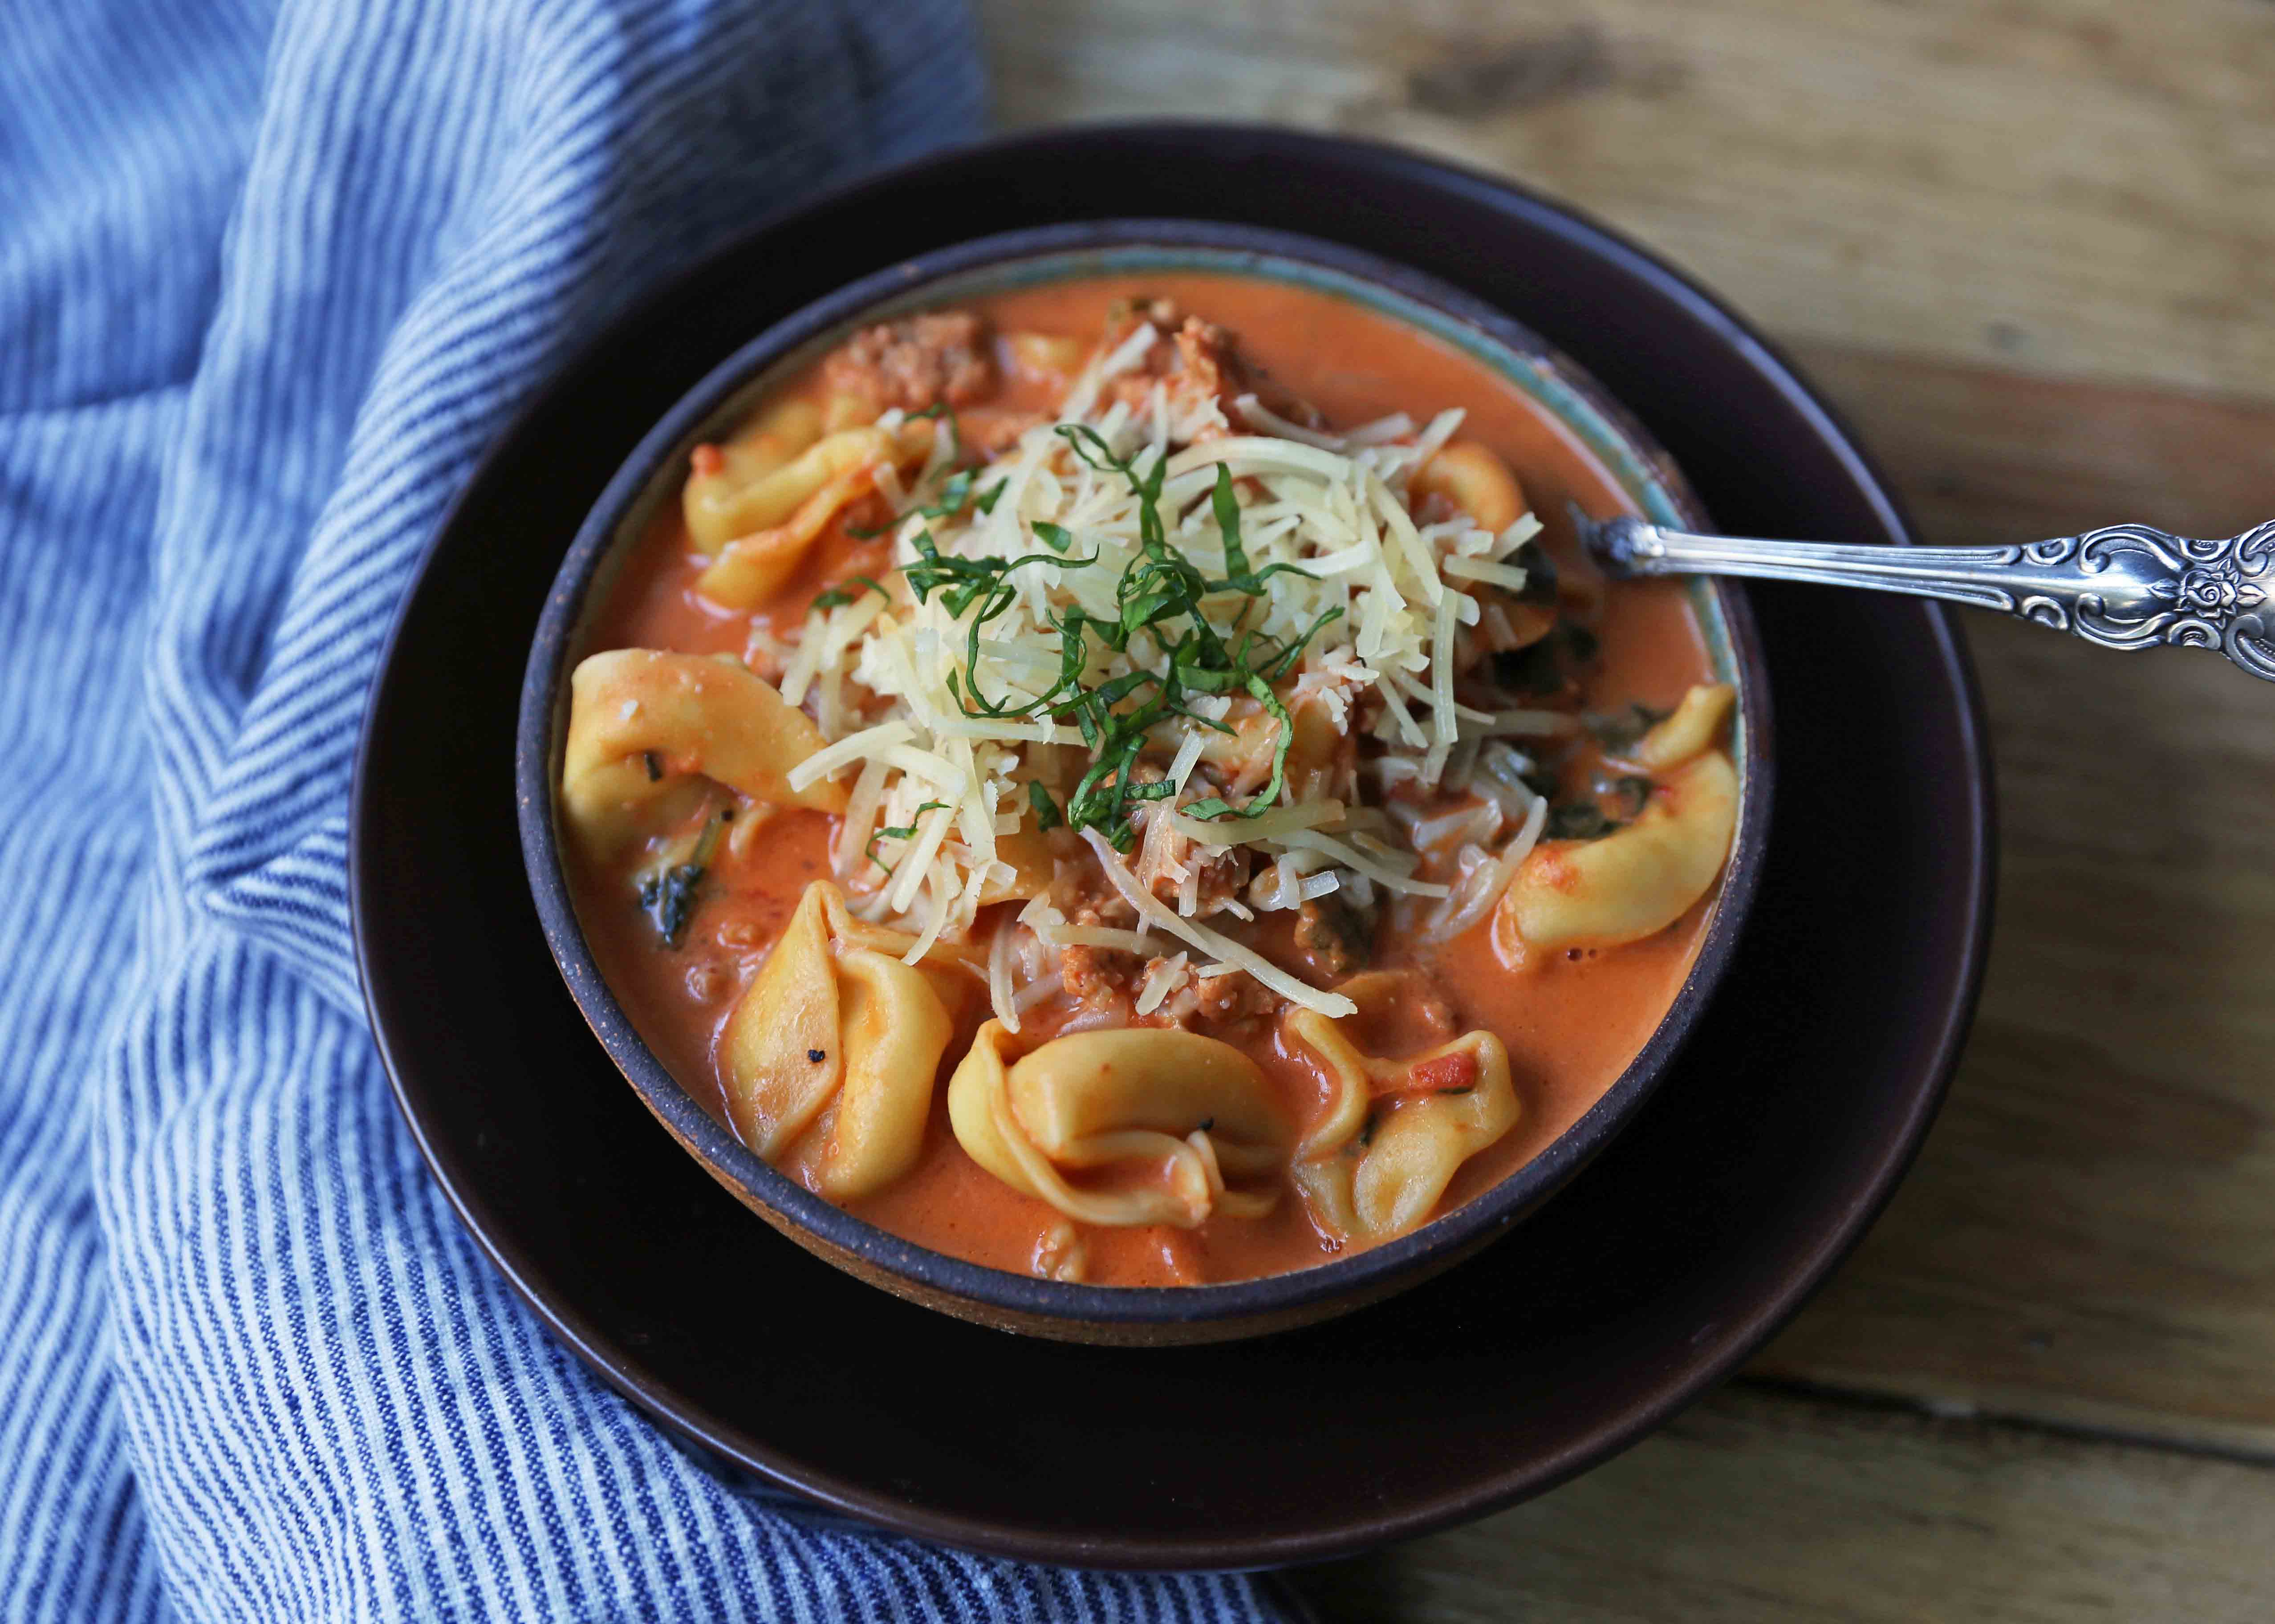 Creamy Sausage Tortellini Soup. A quick and easy 6-ingredient popular Creamy Sausage Tortellini Pasta Soup. A family favorite soup recipe! www.modernhoney.com #soup #souprecipe #sausagetortellinisoup #slowcooker #bestsoups